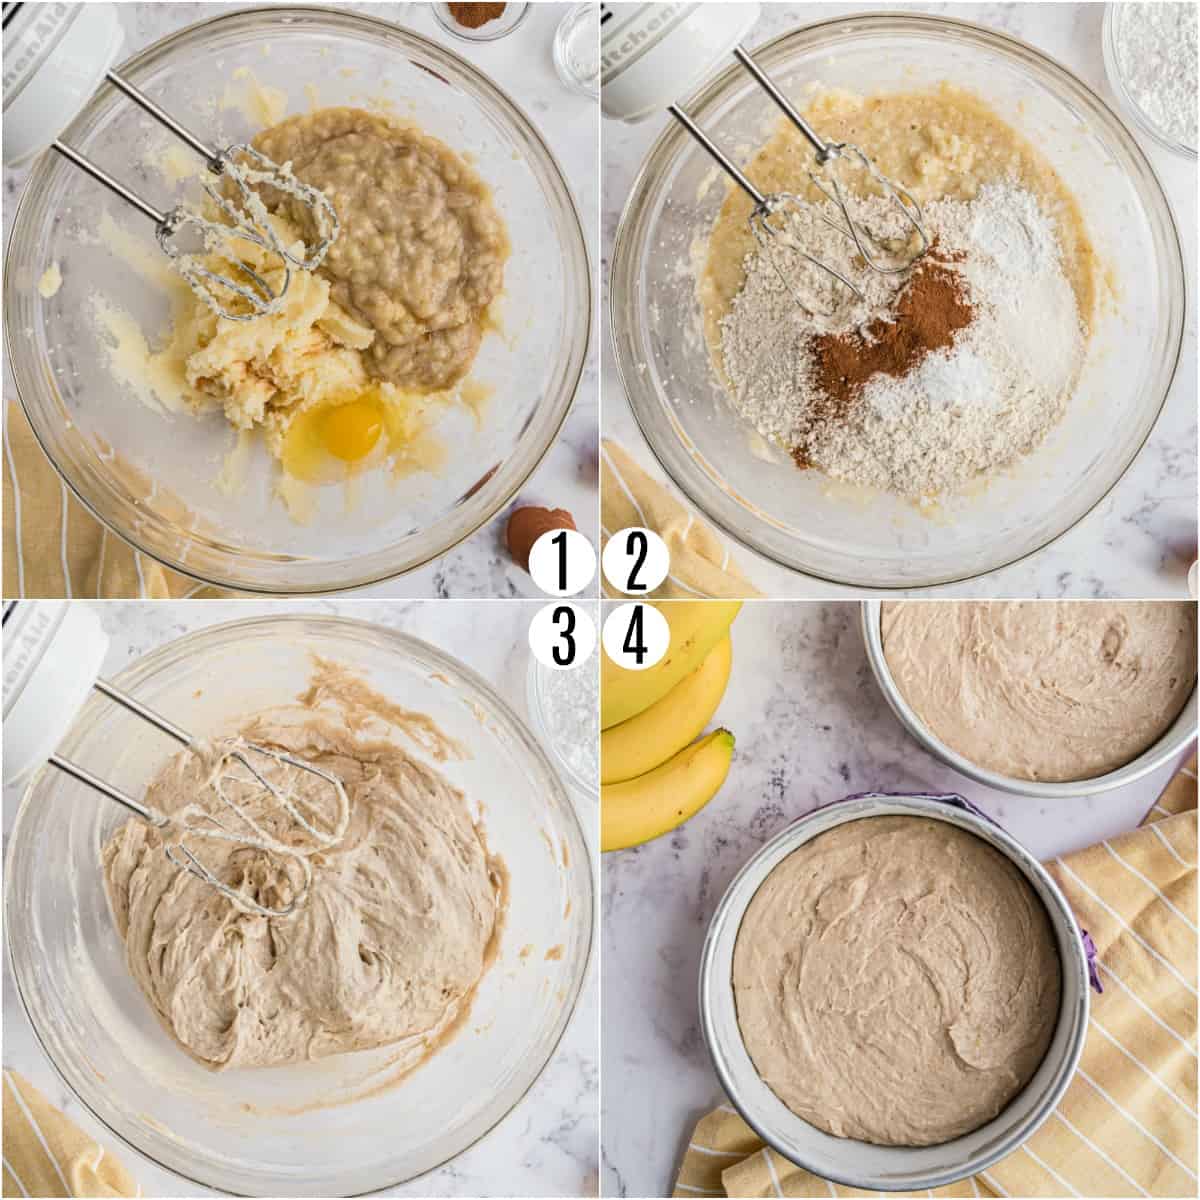 Step by step photos showing how to make banana cake.